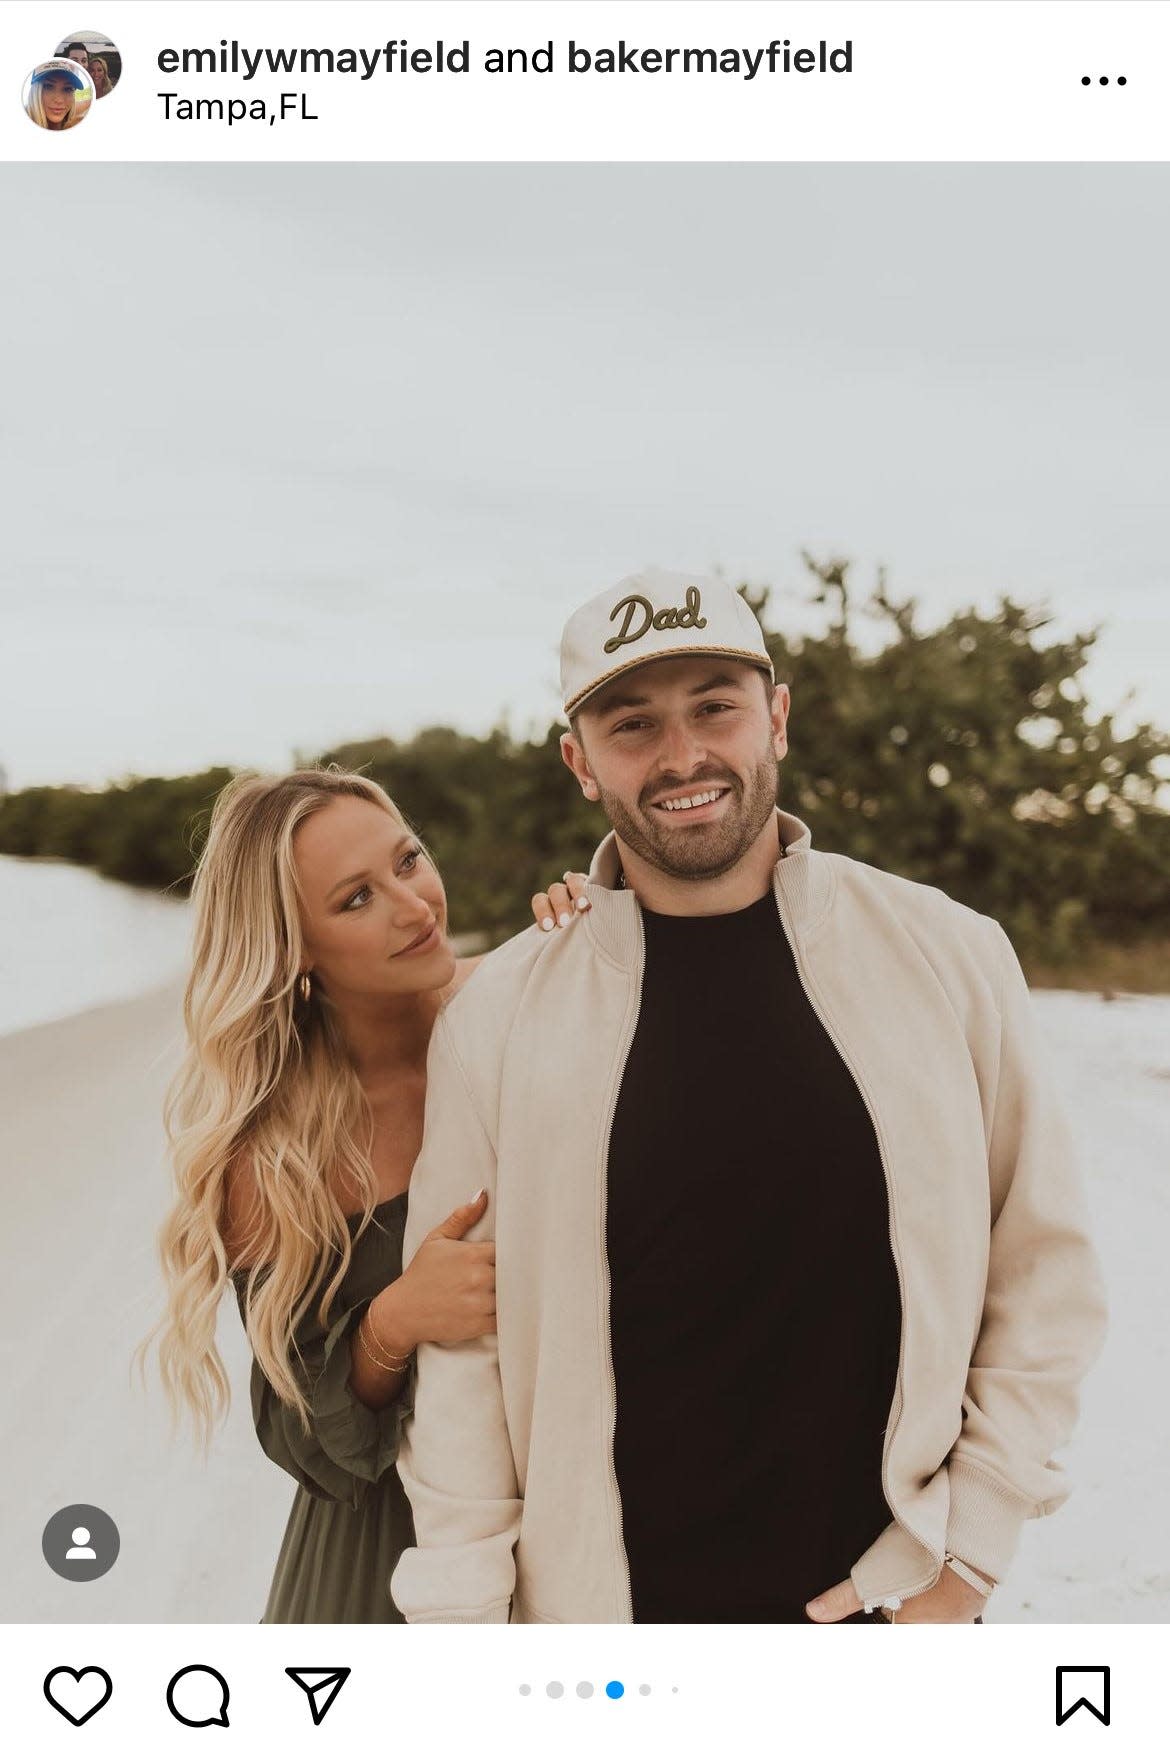 Former University of Oklahoma quarterback Baker Mayfield and his wife, Emily, announced that they are expecting a baby girl in the spring.